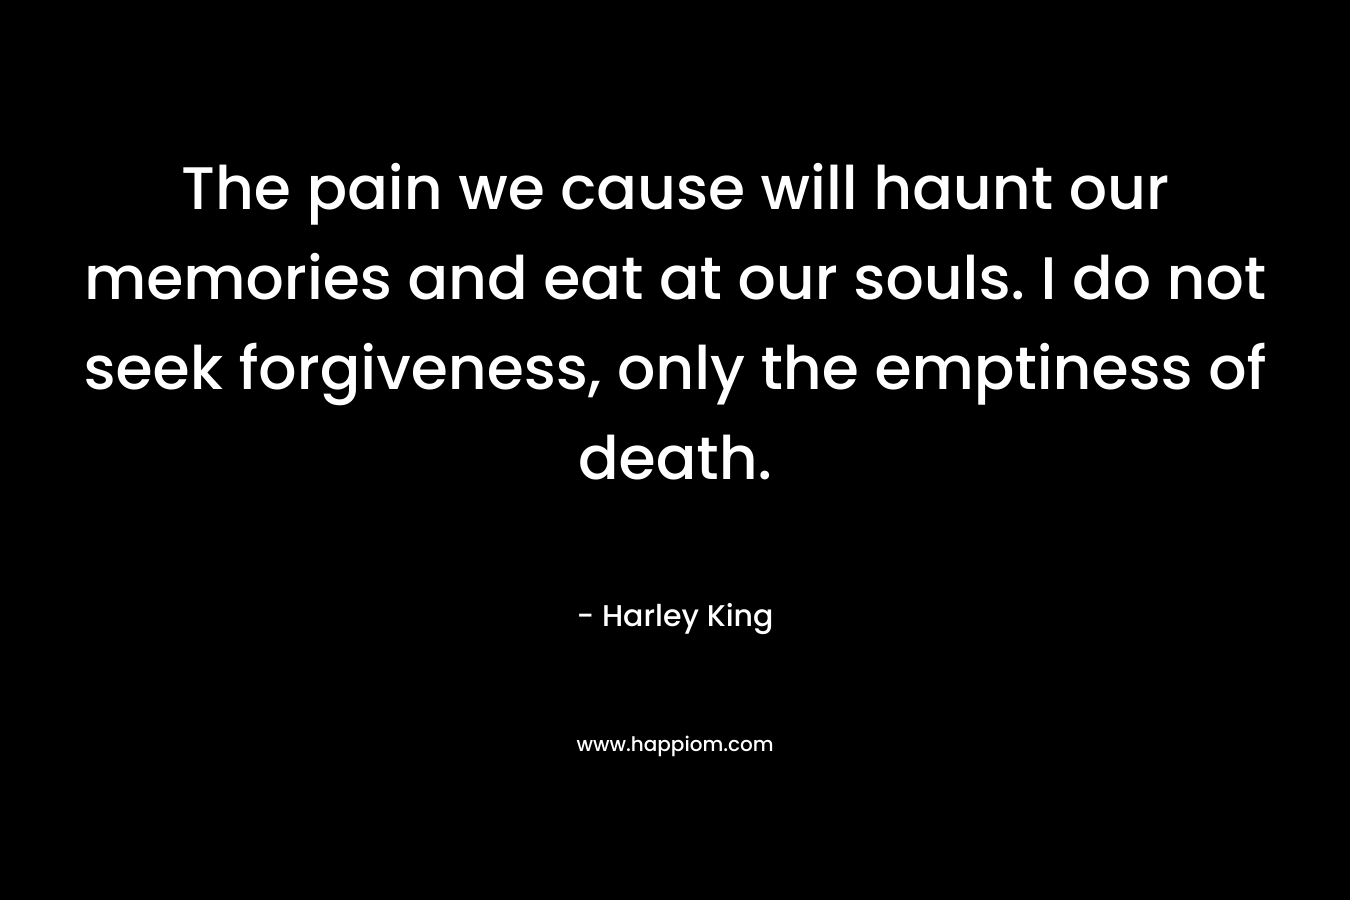 The pain we cause will haunt our memories and eat at our souls. I do not seek forgiveness, only the emptiness of death.